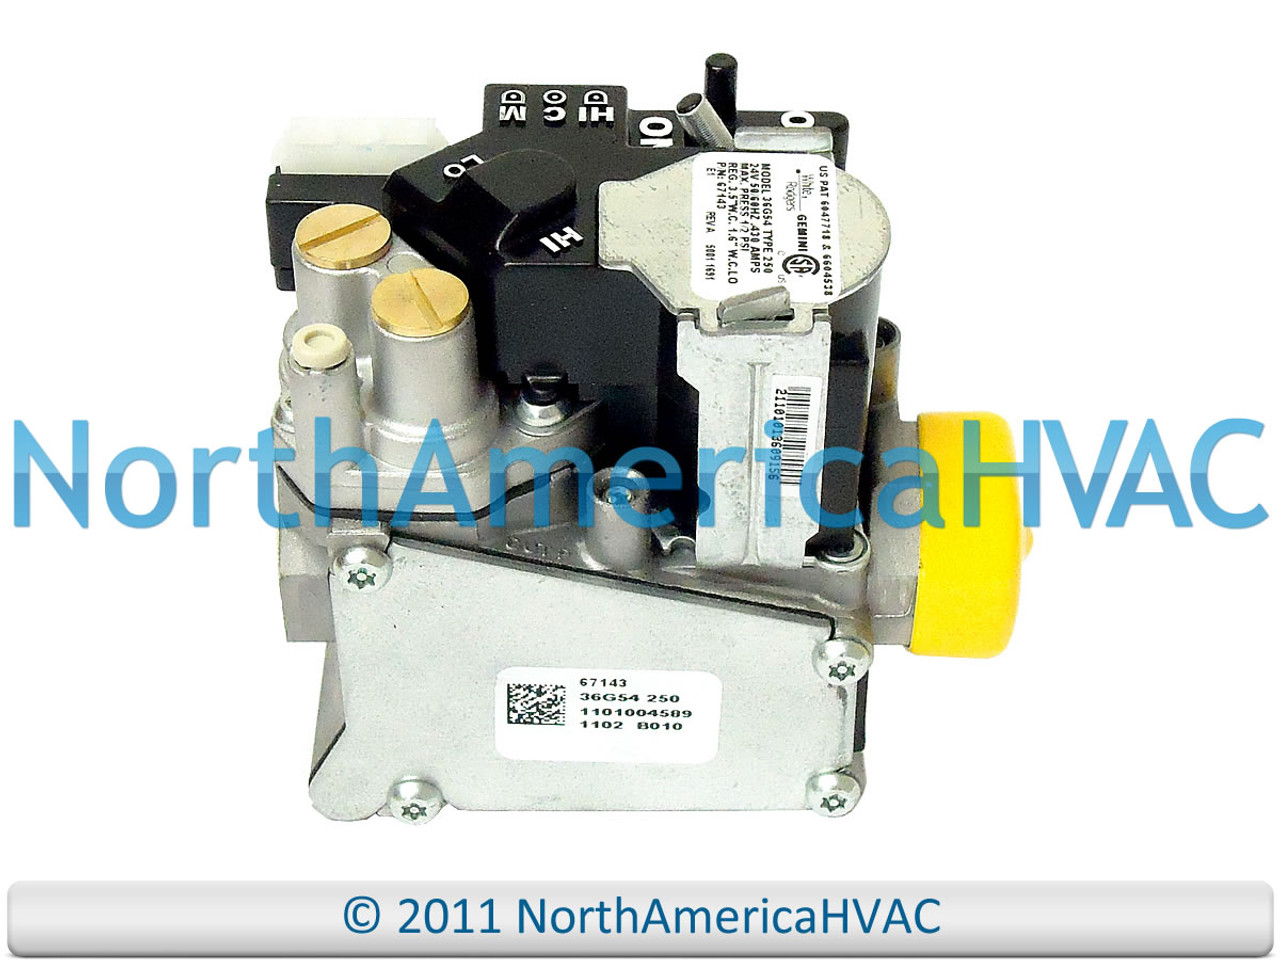 OEM Upgraded Replacement for Luxaire Furnace Gas Valve 025-30888-000 